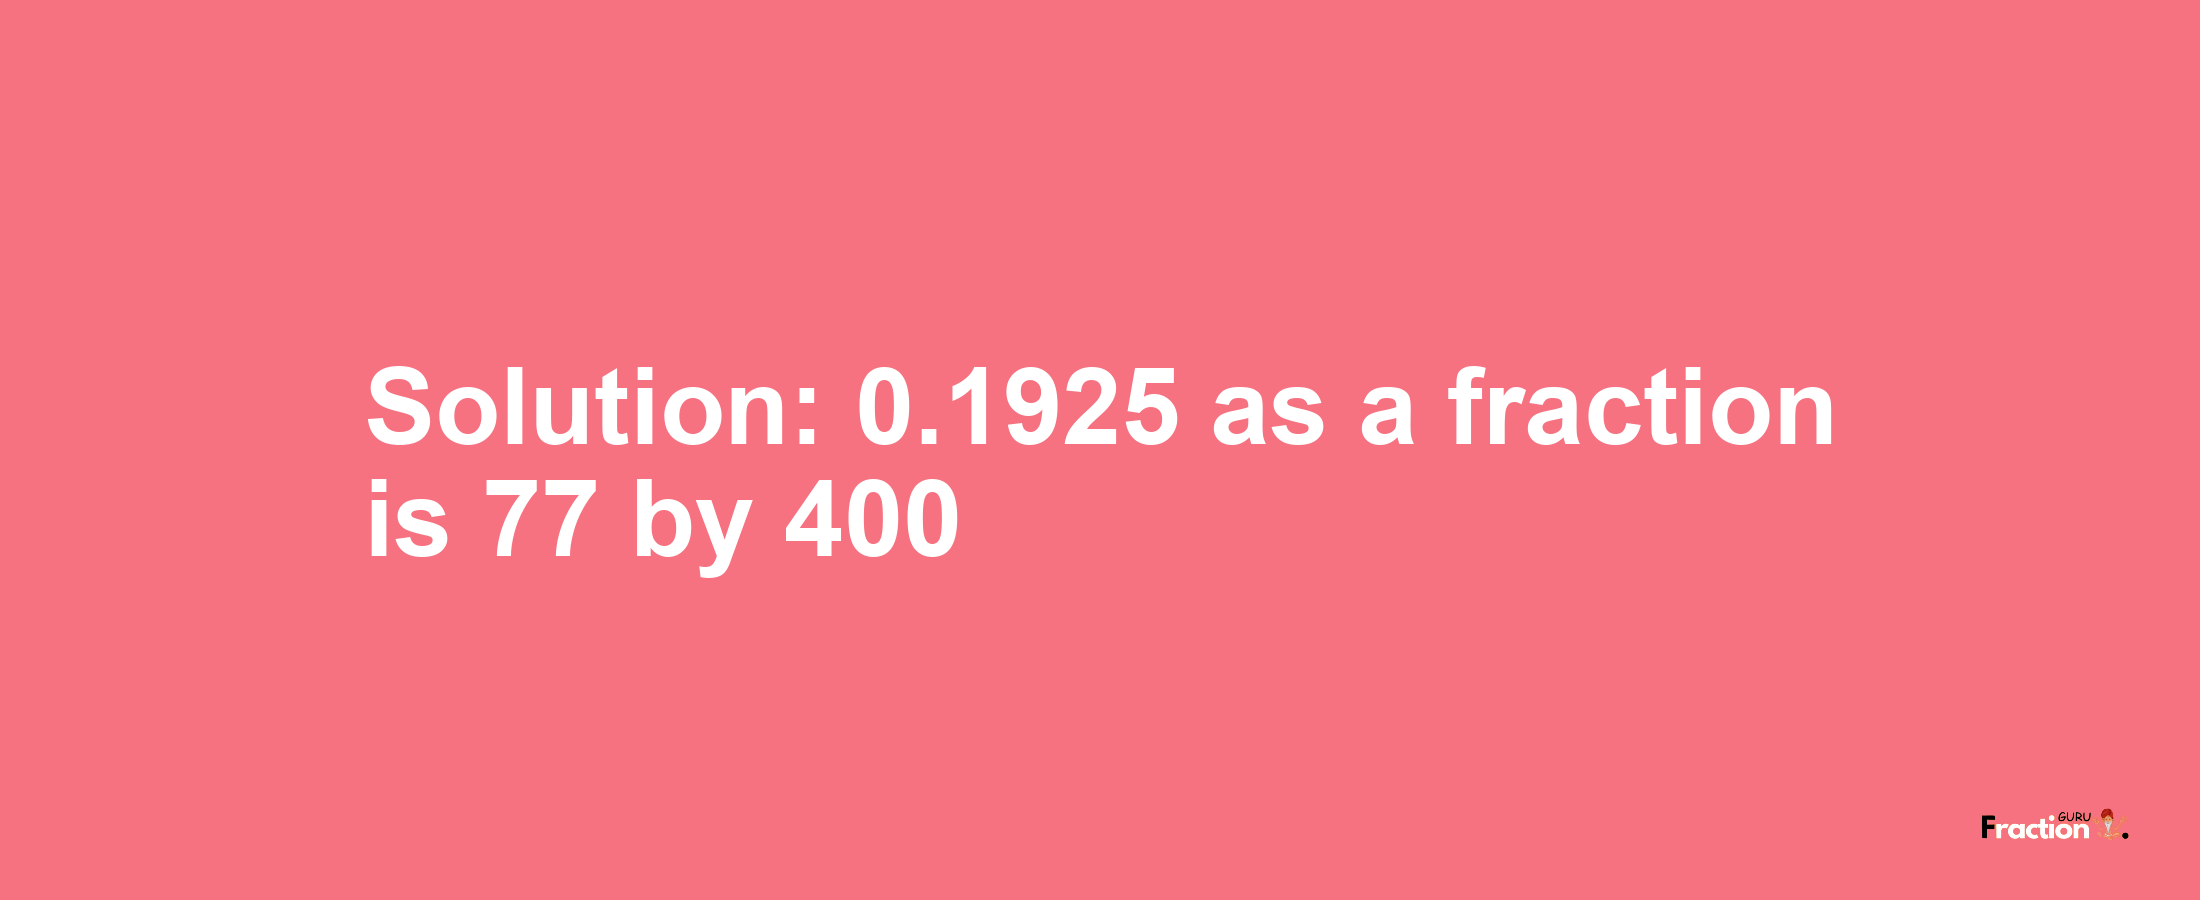 Solution:0.1925 as a fraction is 77/400